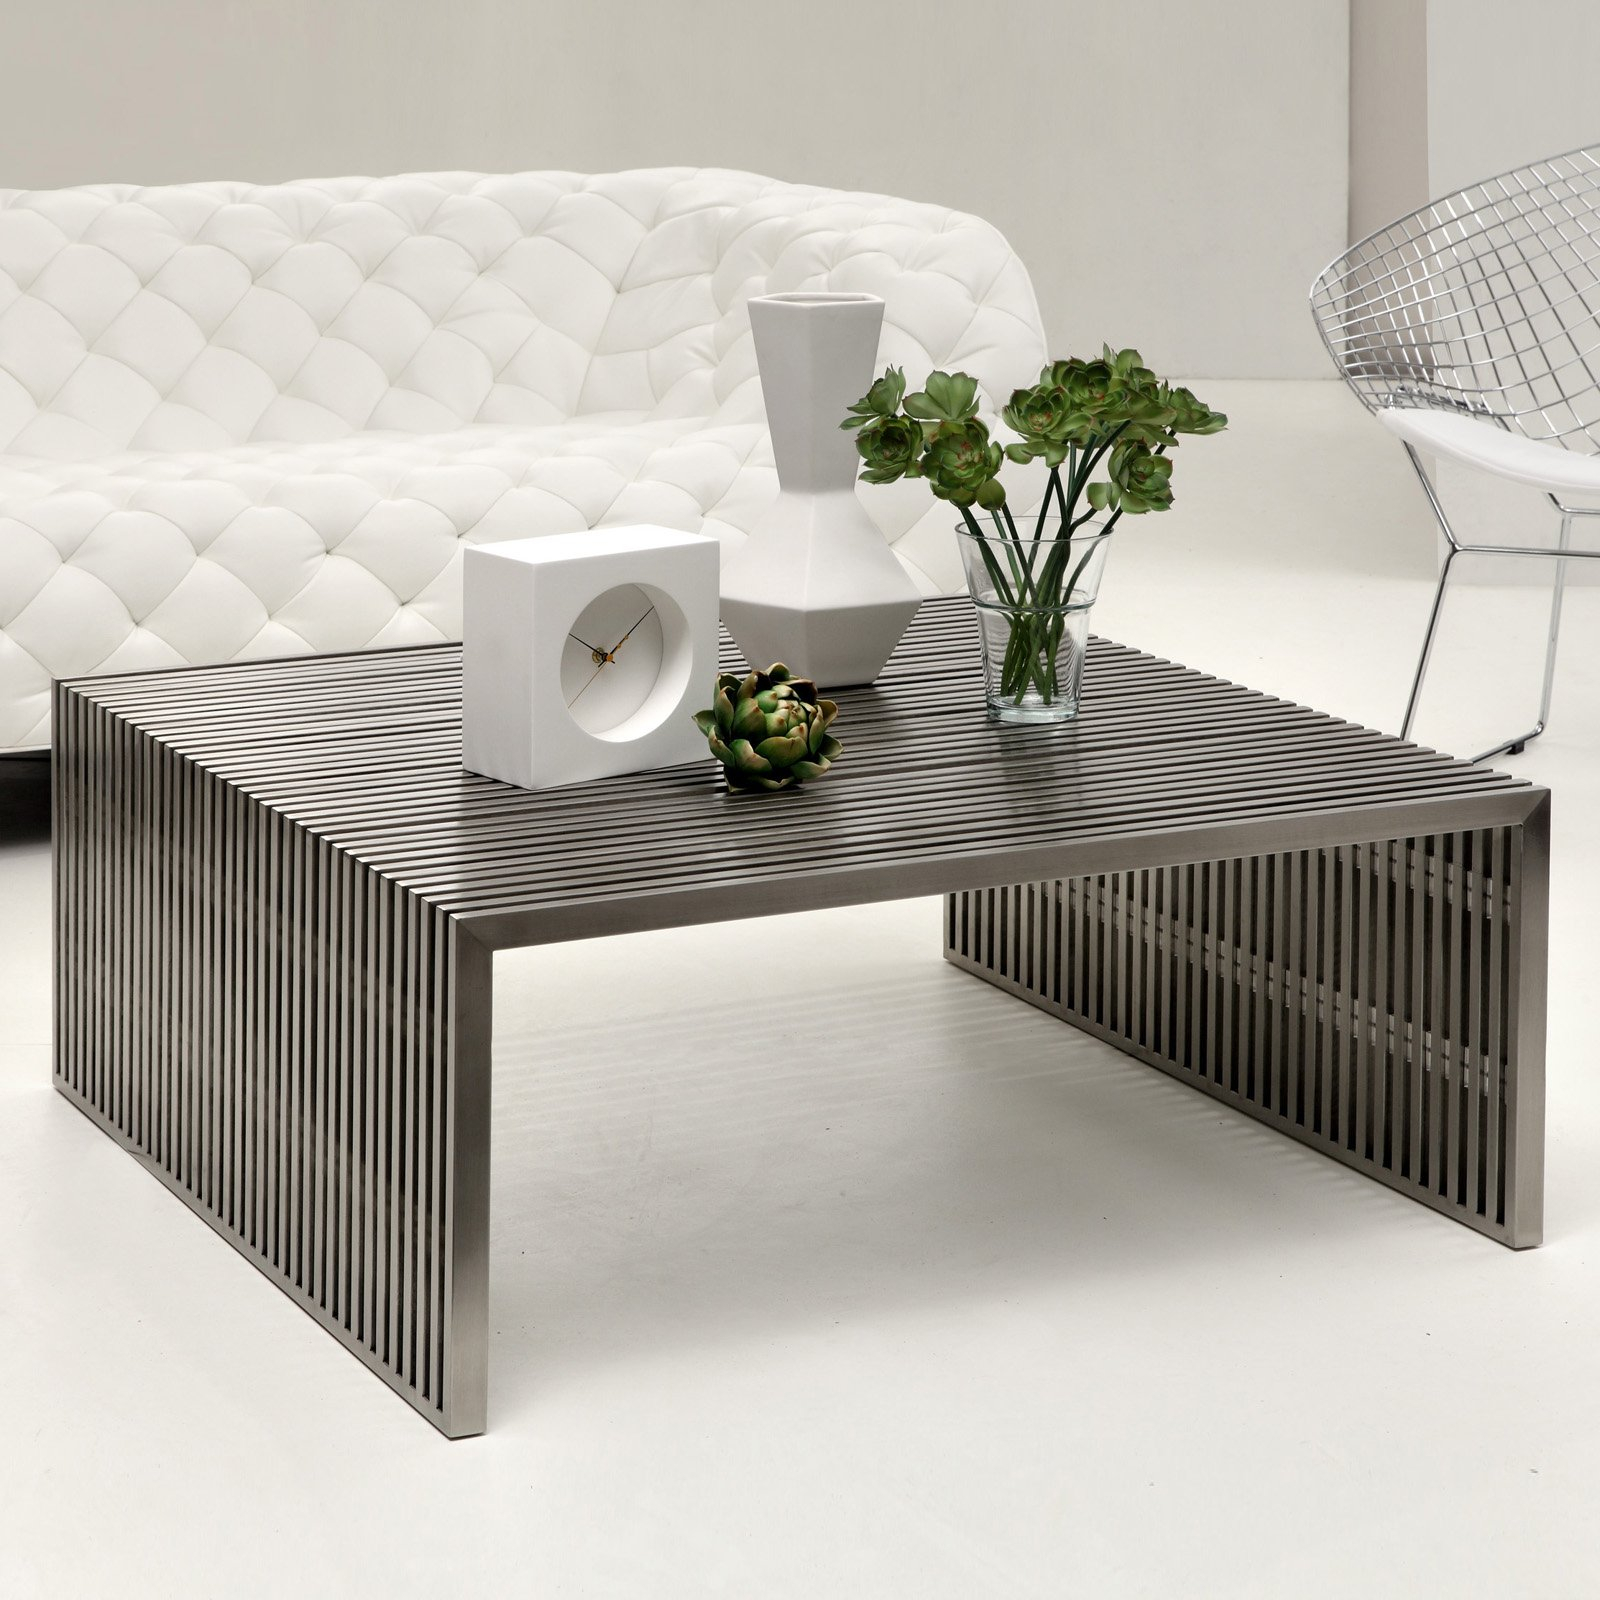 Novel Square Coffee Table Walmart within proportions 1600 X 1600